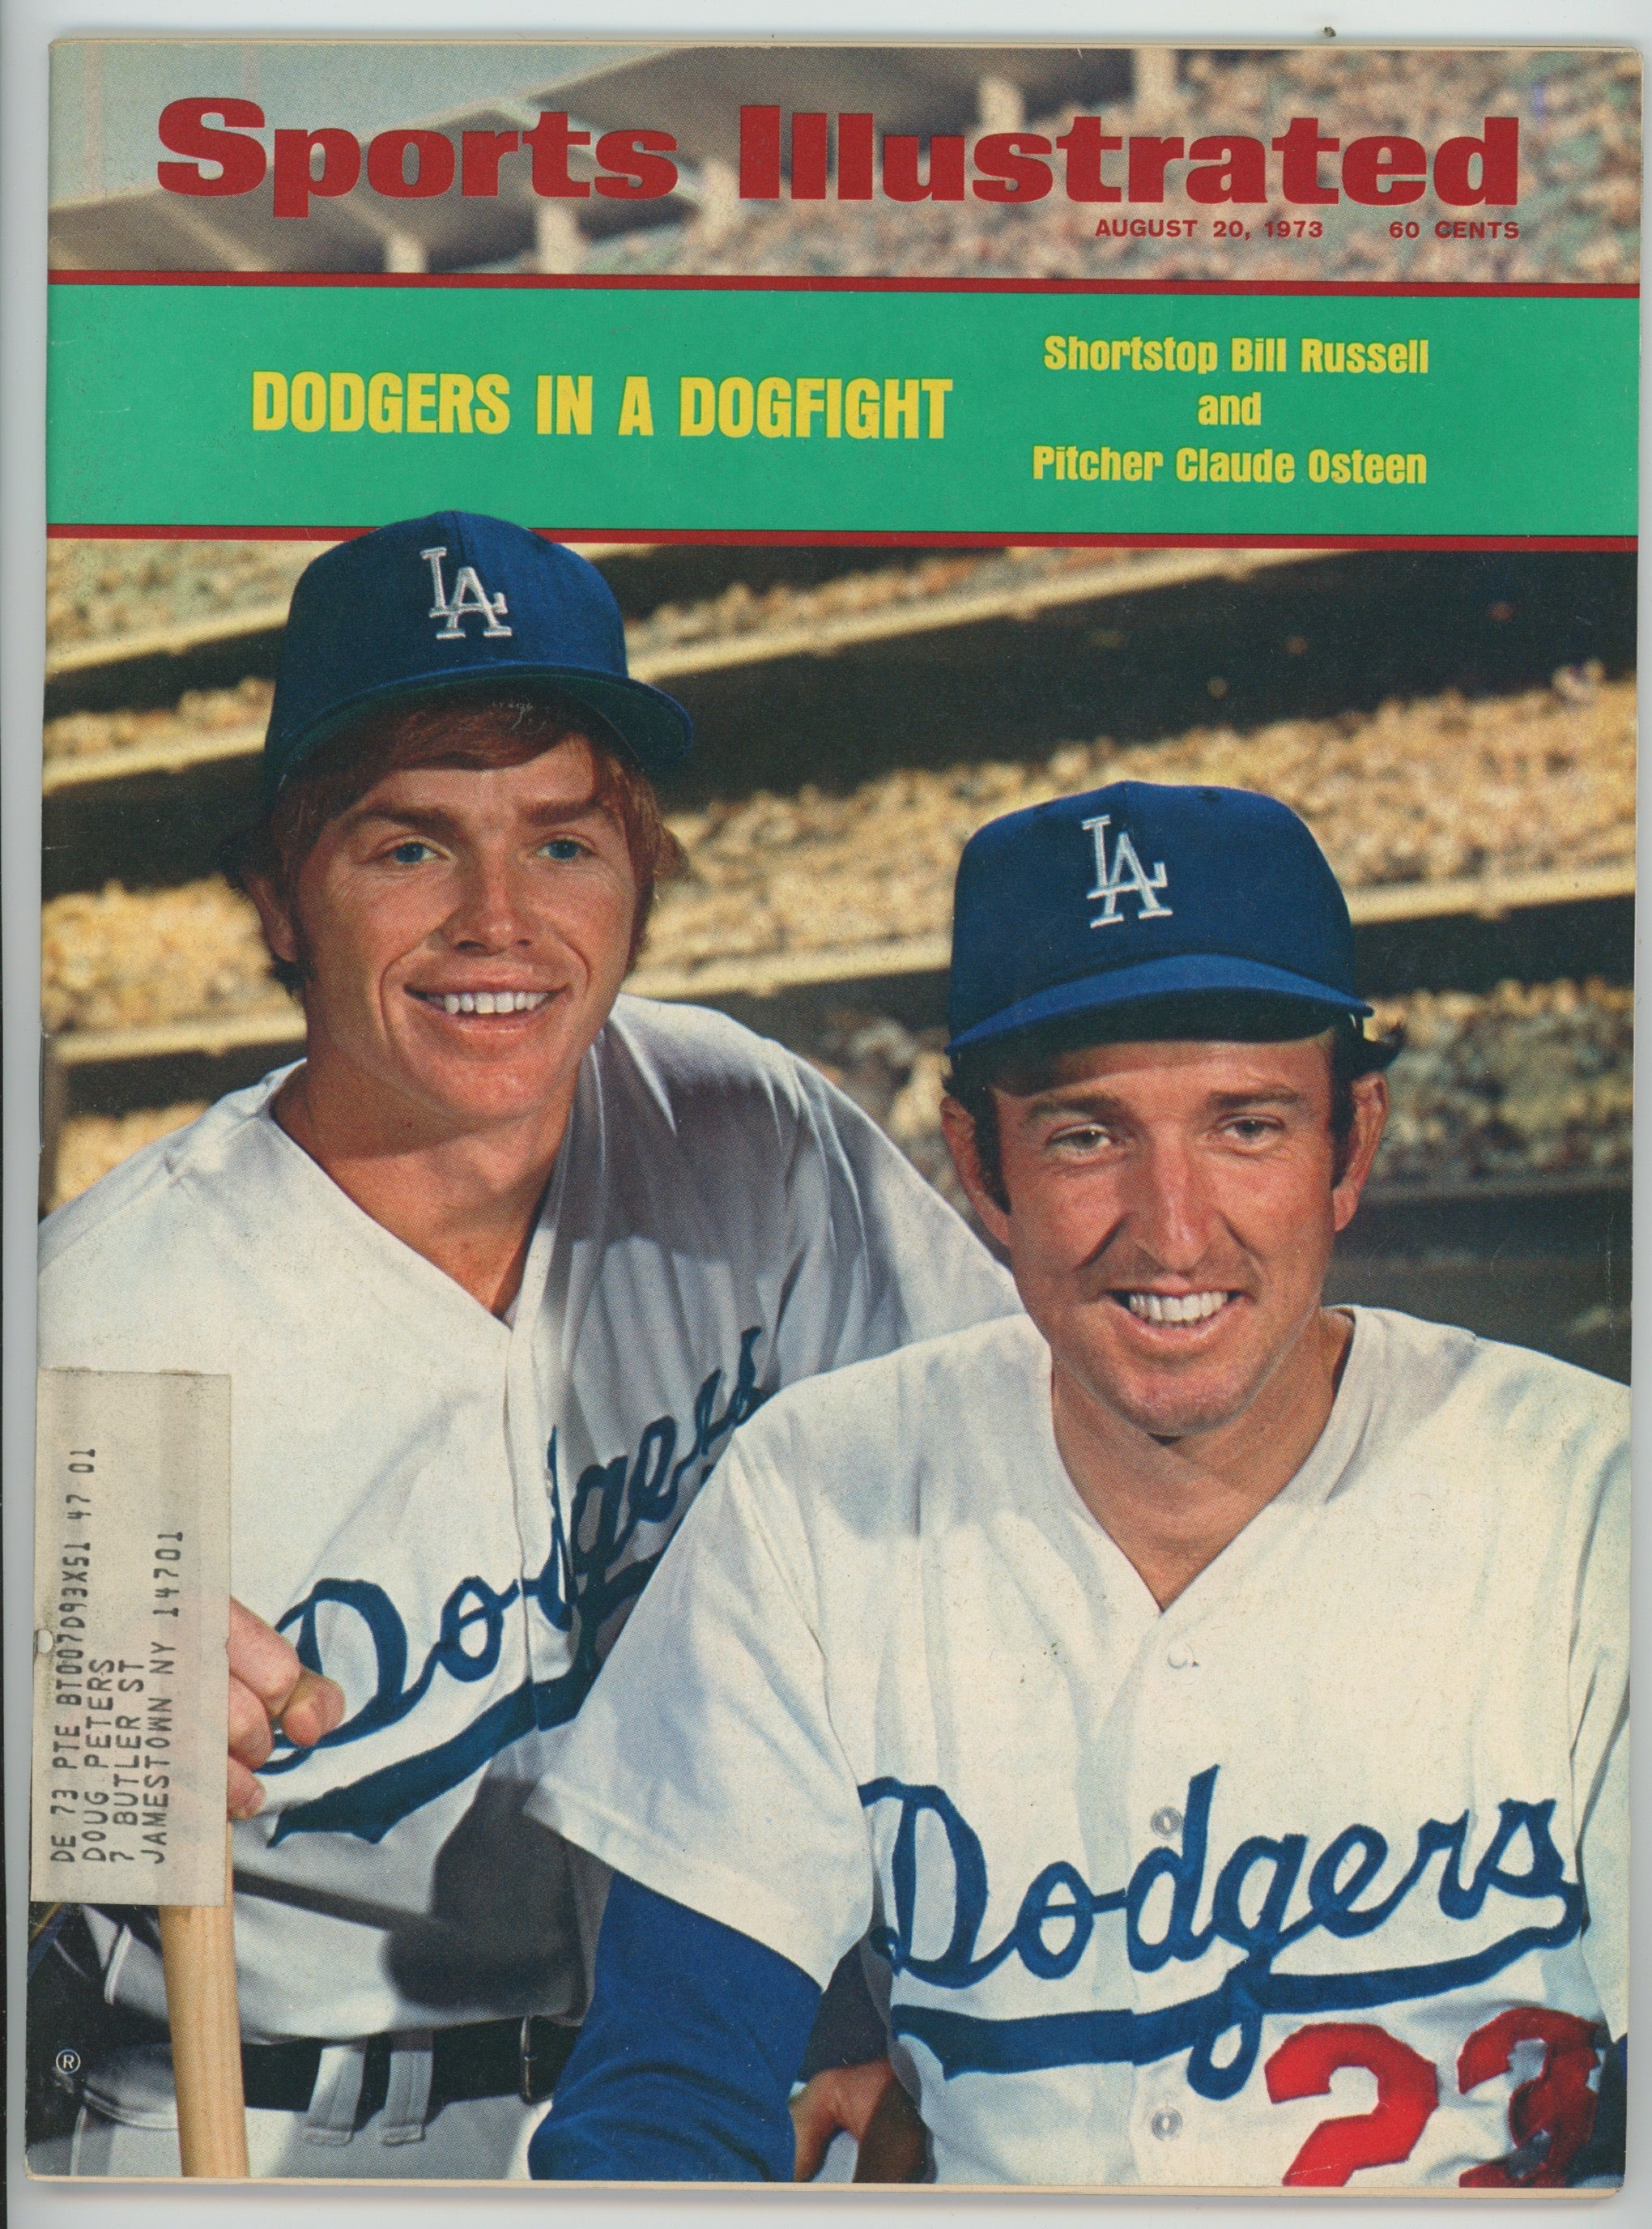 Bill Russell & Claude Osteen L.A. Dodgers "Dodgers in a Dogfight" 8/20/73 Sports Illustrated ML